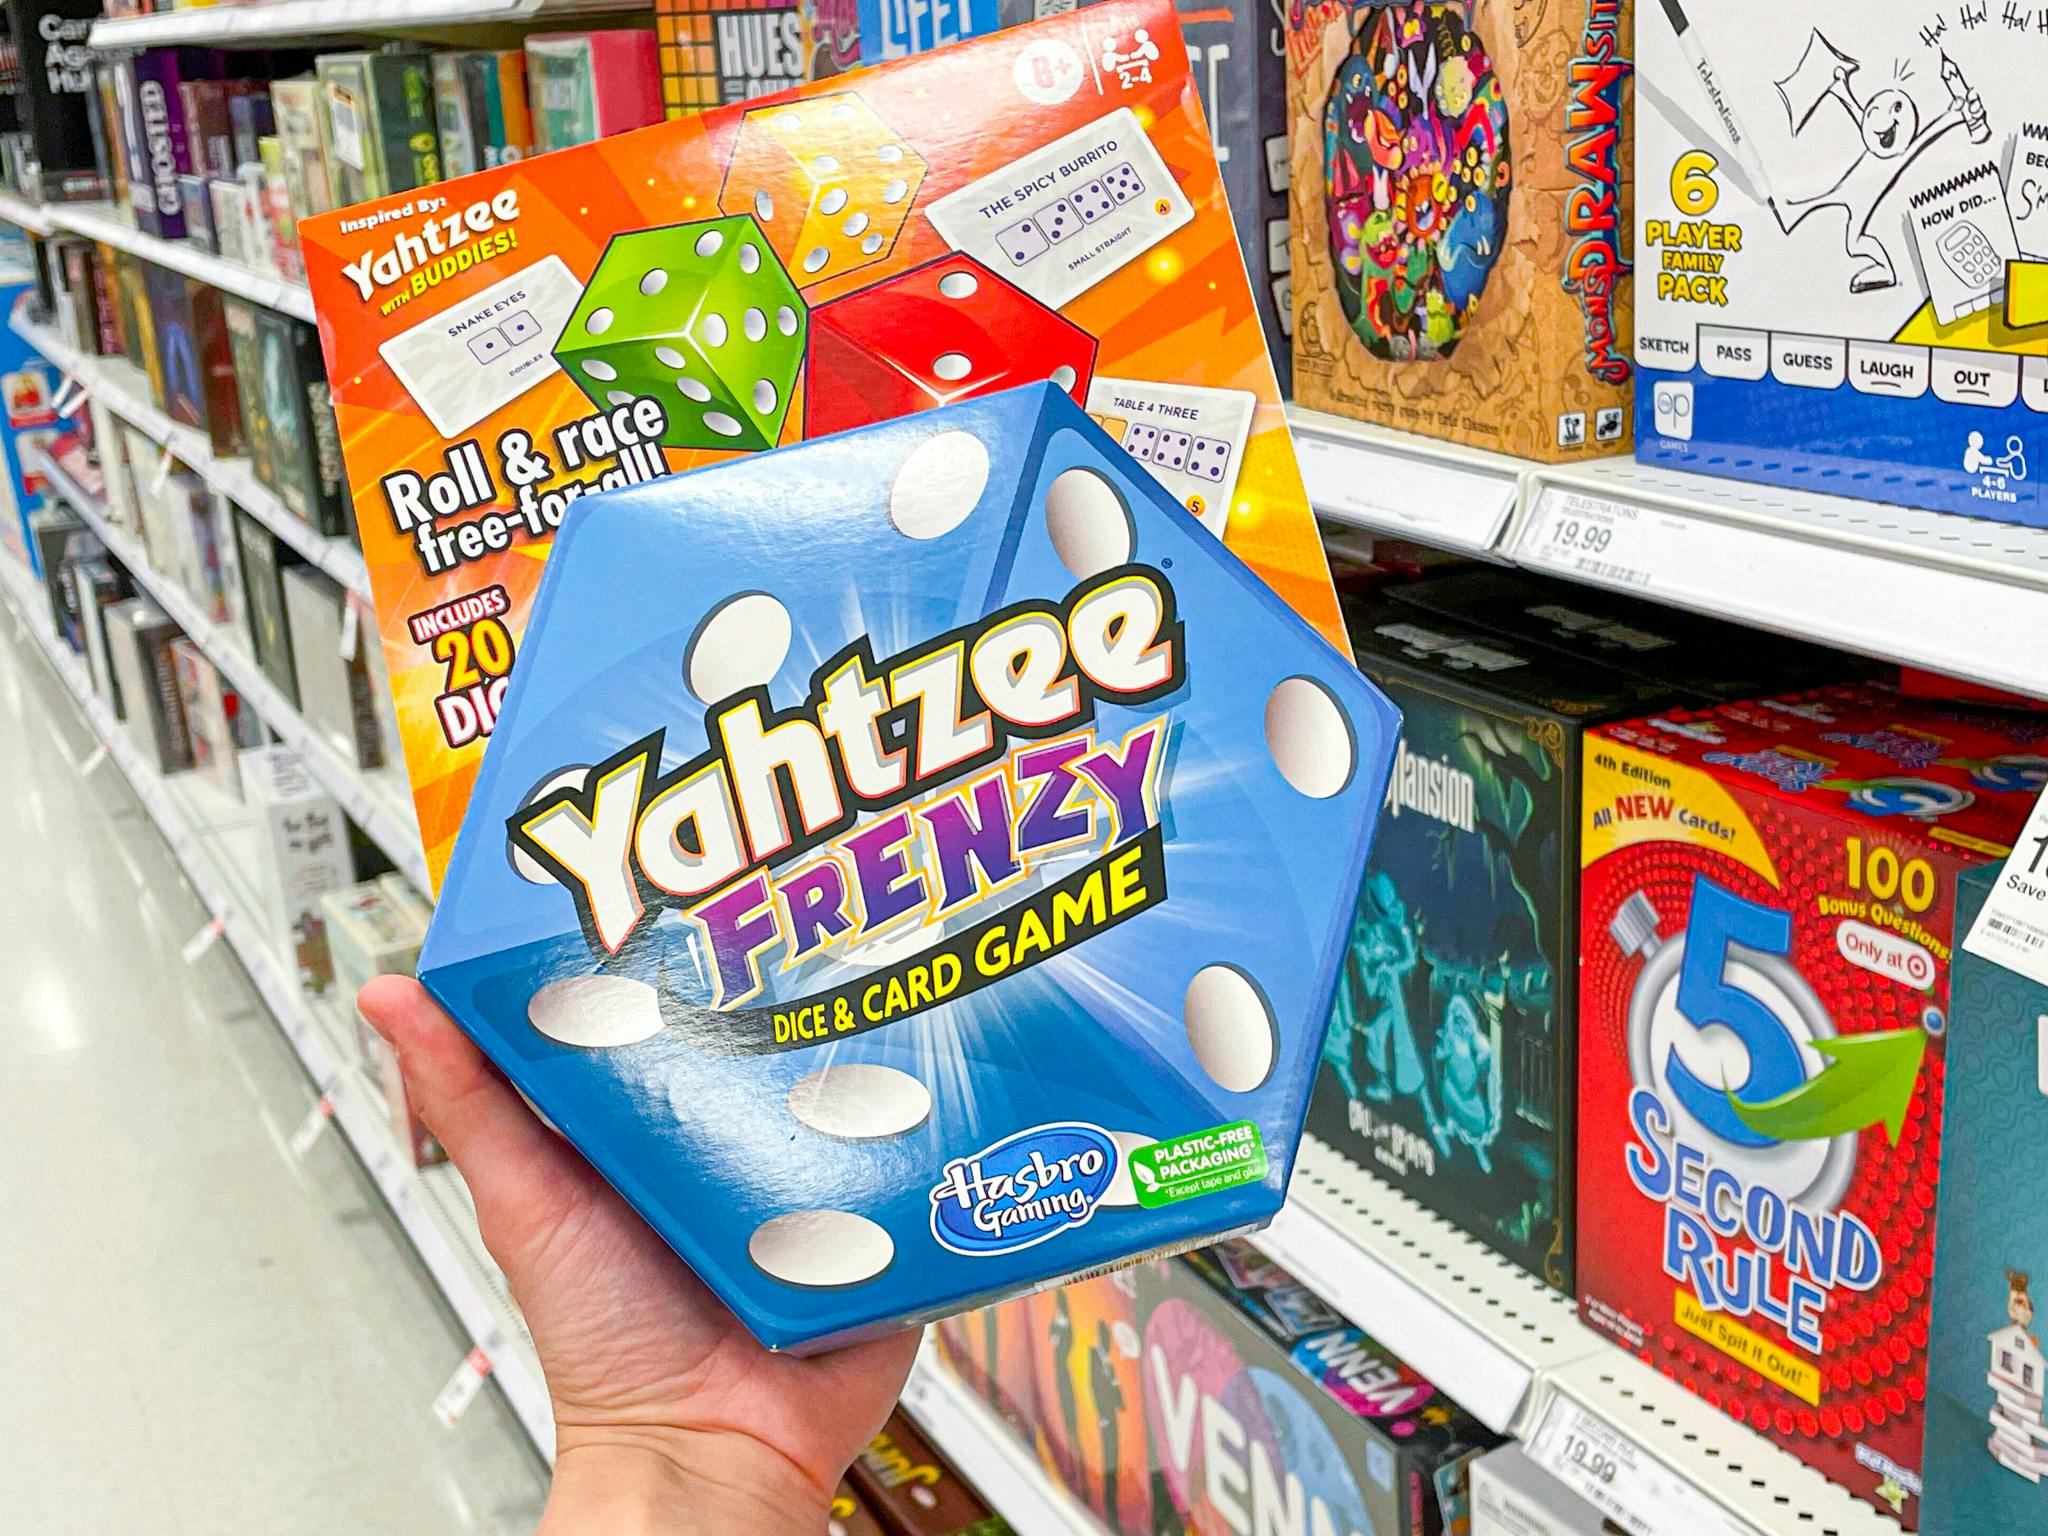 A person's hand holding a Yahtzee Frenzy card game in target aisle